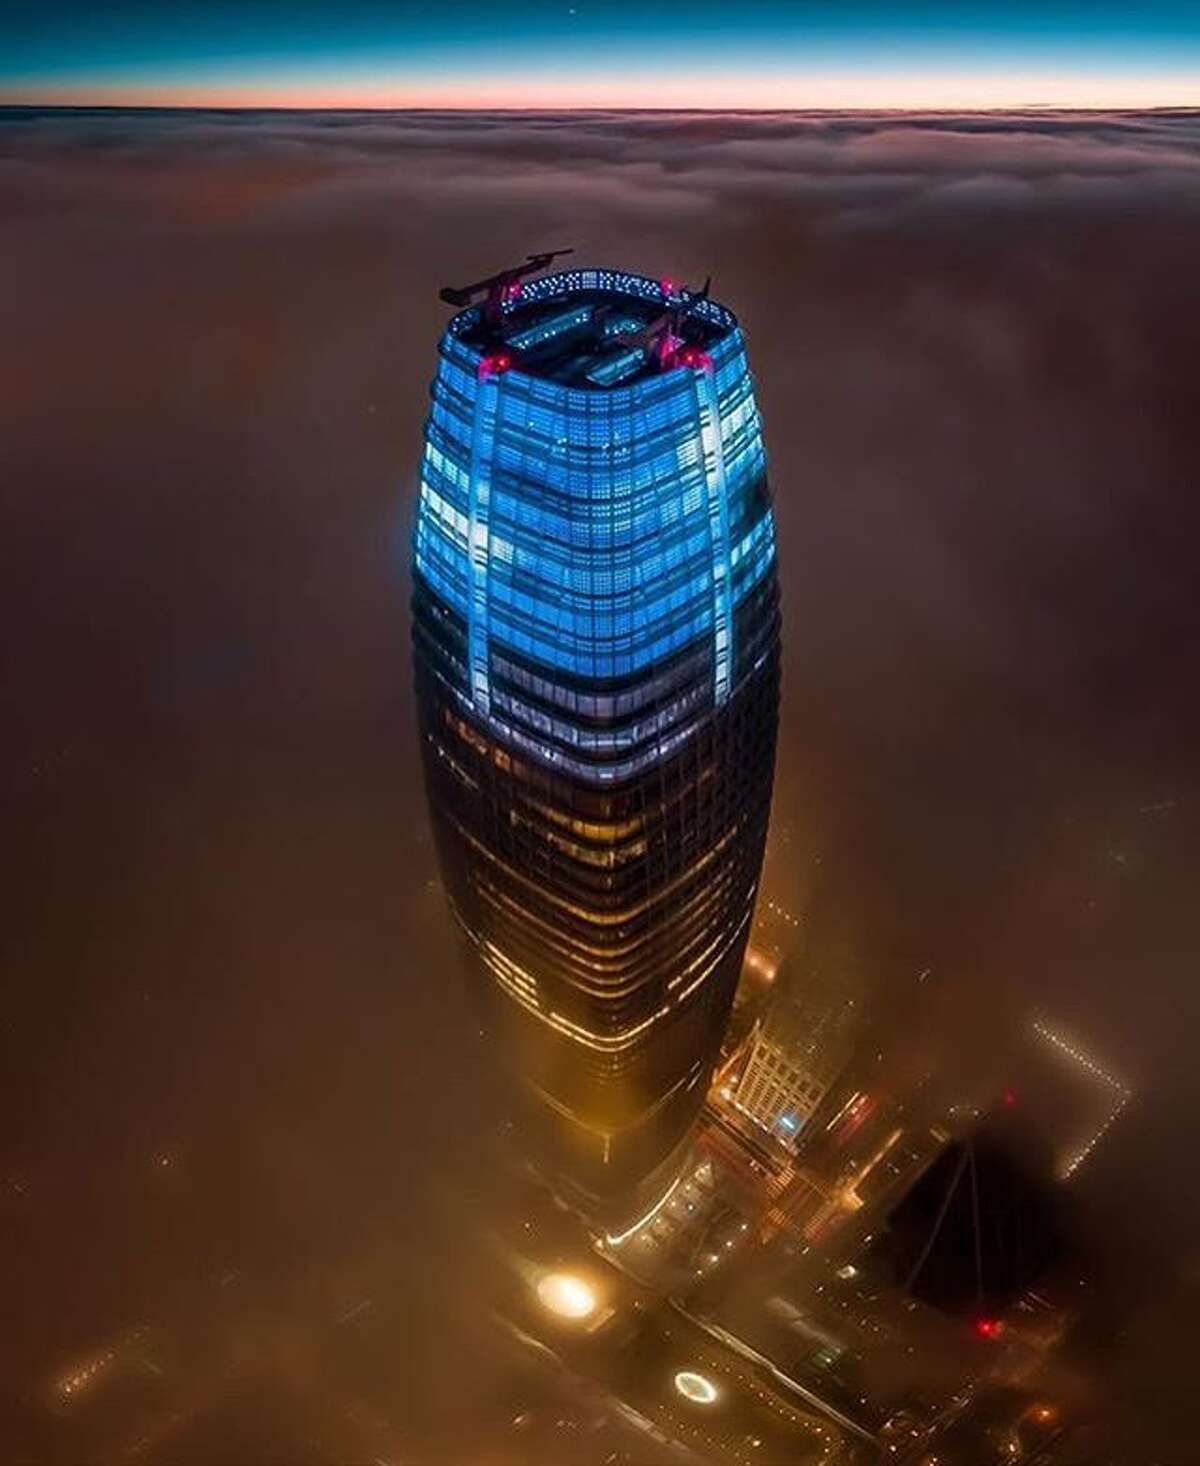 Above the Salesforce Tower by @streets.win